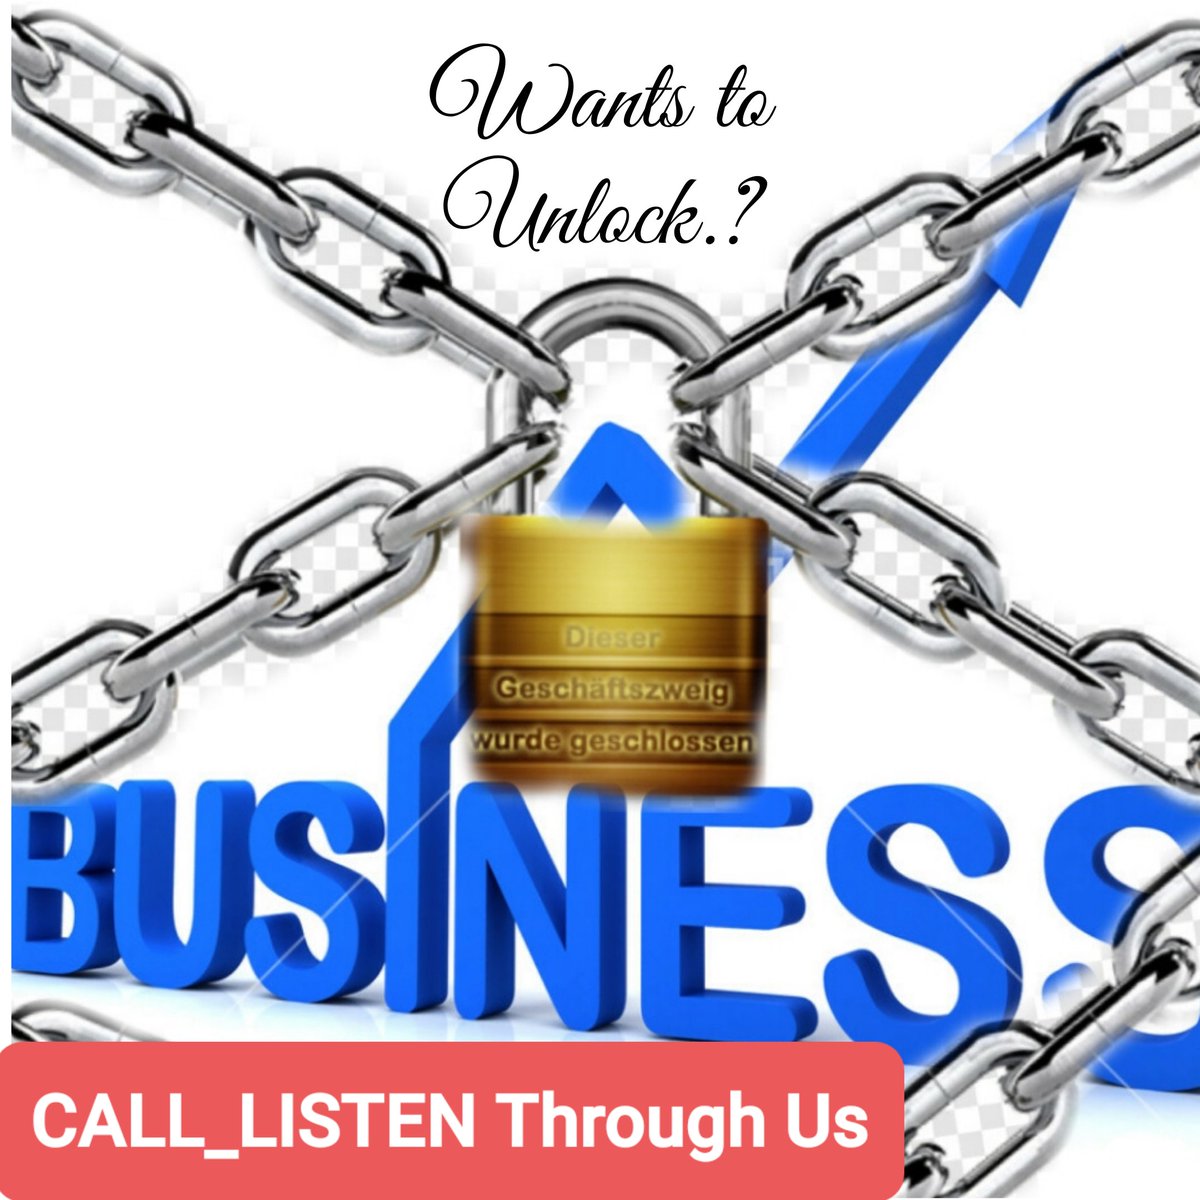 In Extended Lockdown
Think, Plan & Brainstorm on

❓Re-Establish B'ness
❓Re-Start B'ness Engine

Doubts?
Contact_

》 9225112233
》 LISTEN Through Us
》 Business Consultants
..visualisation to actualisation!

#ListenThroughUs #Lockdown #BusinessRestructuring #BounceBackPlanning